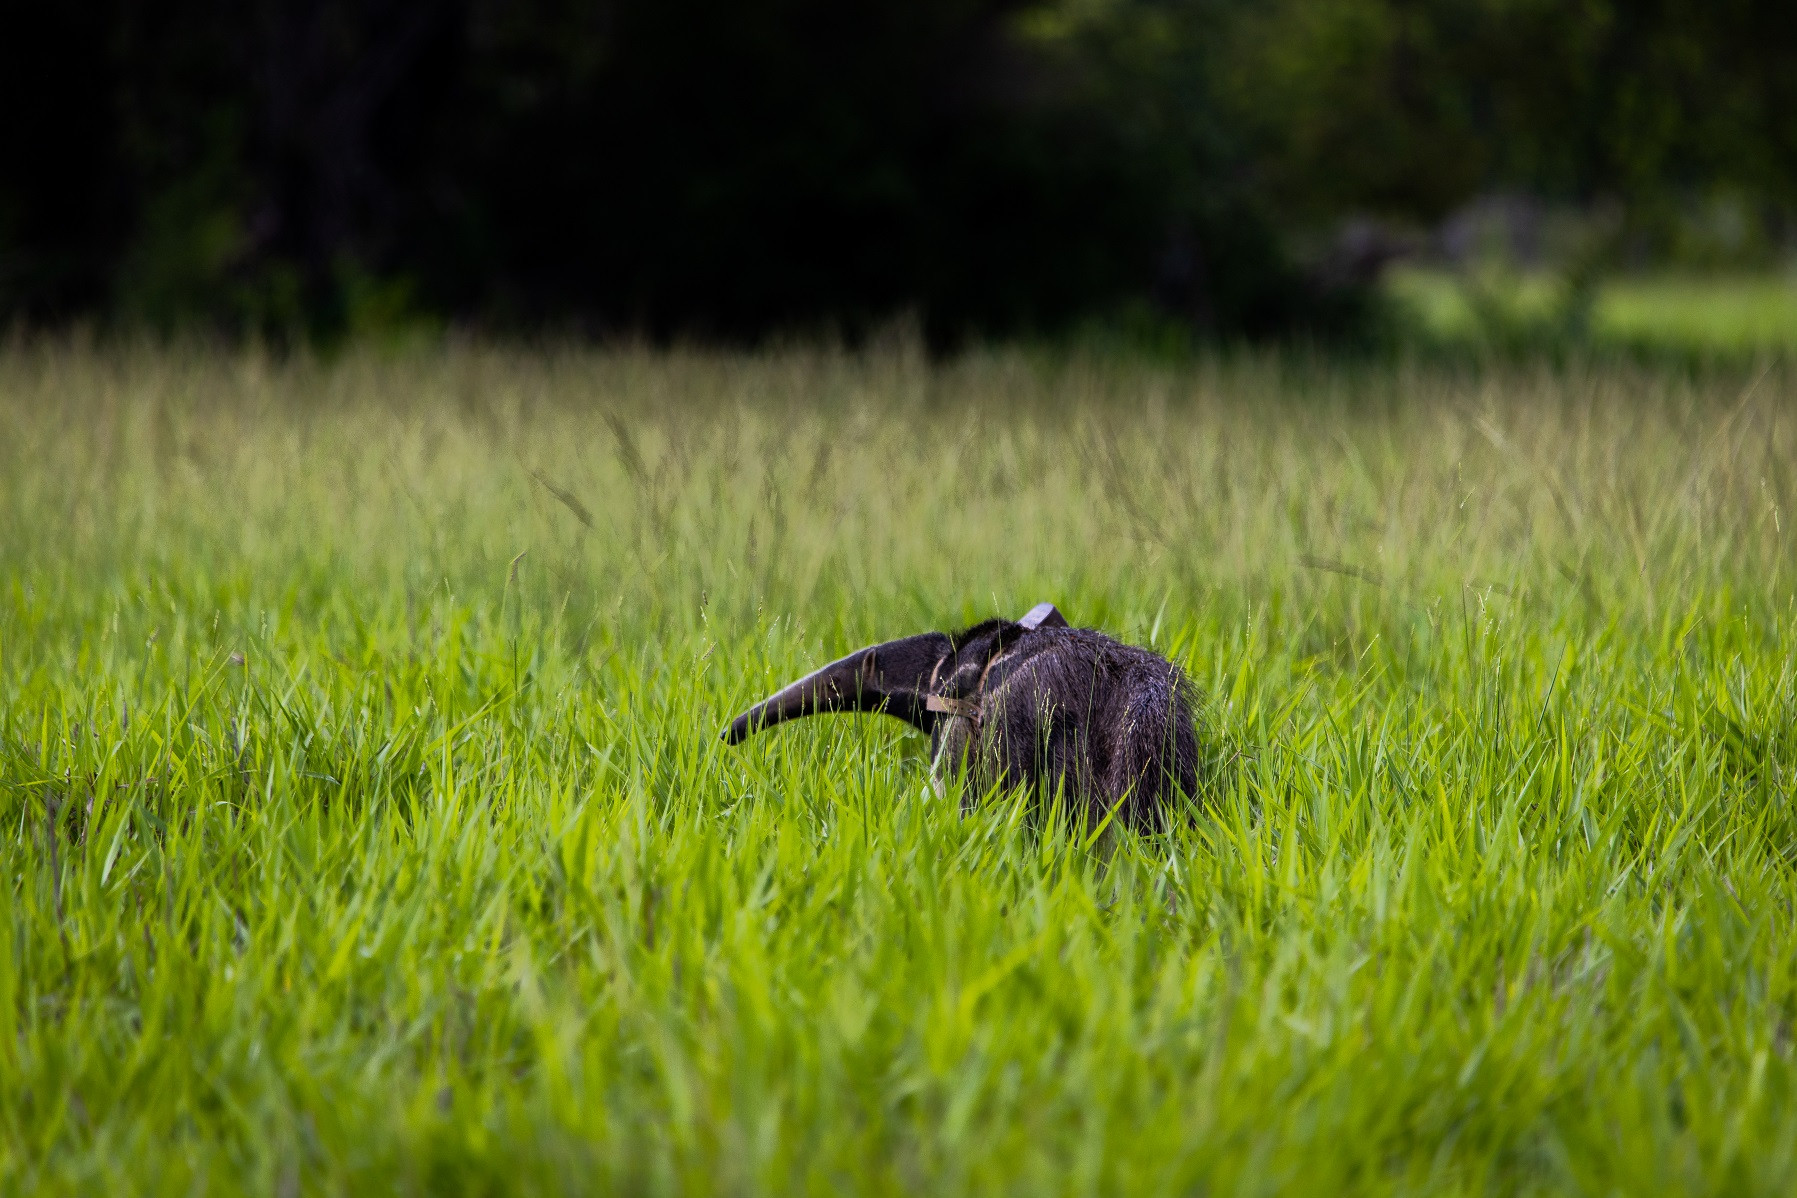 An anteater in the grass